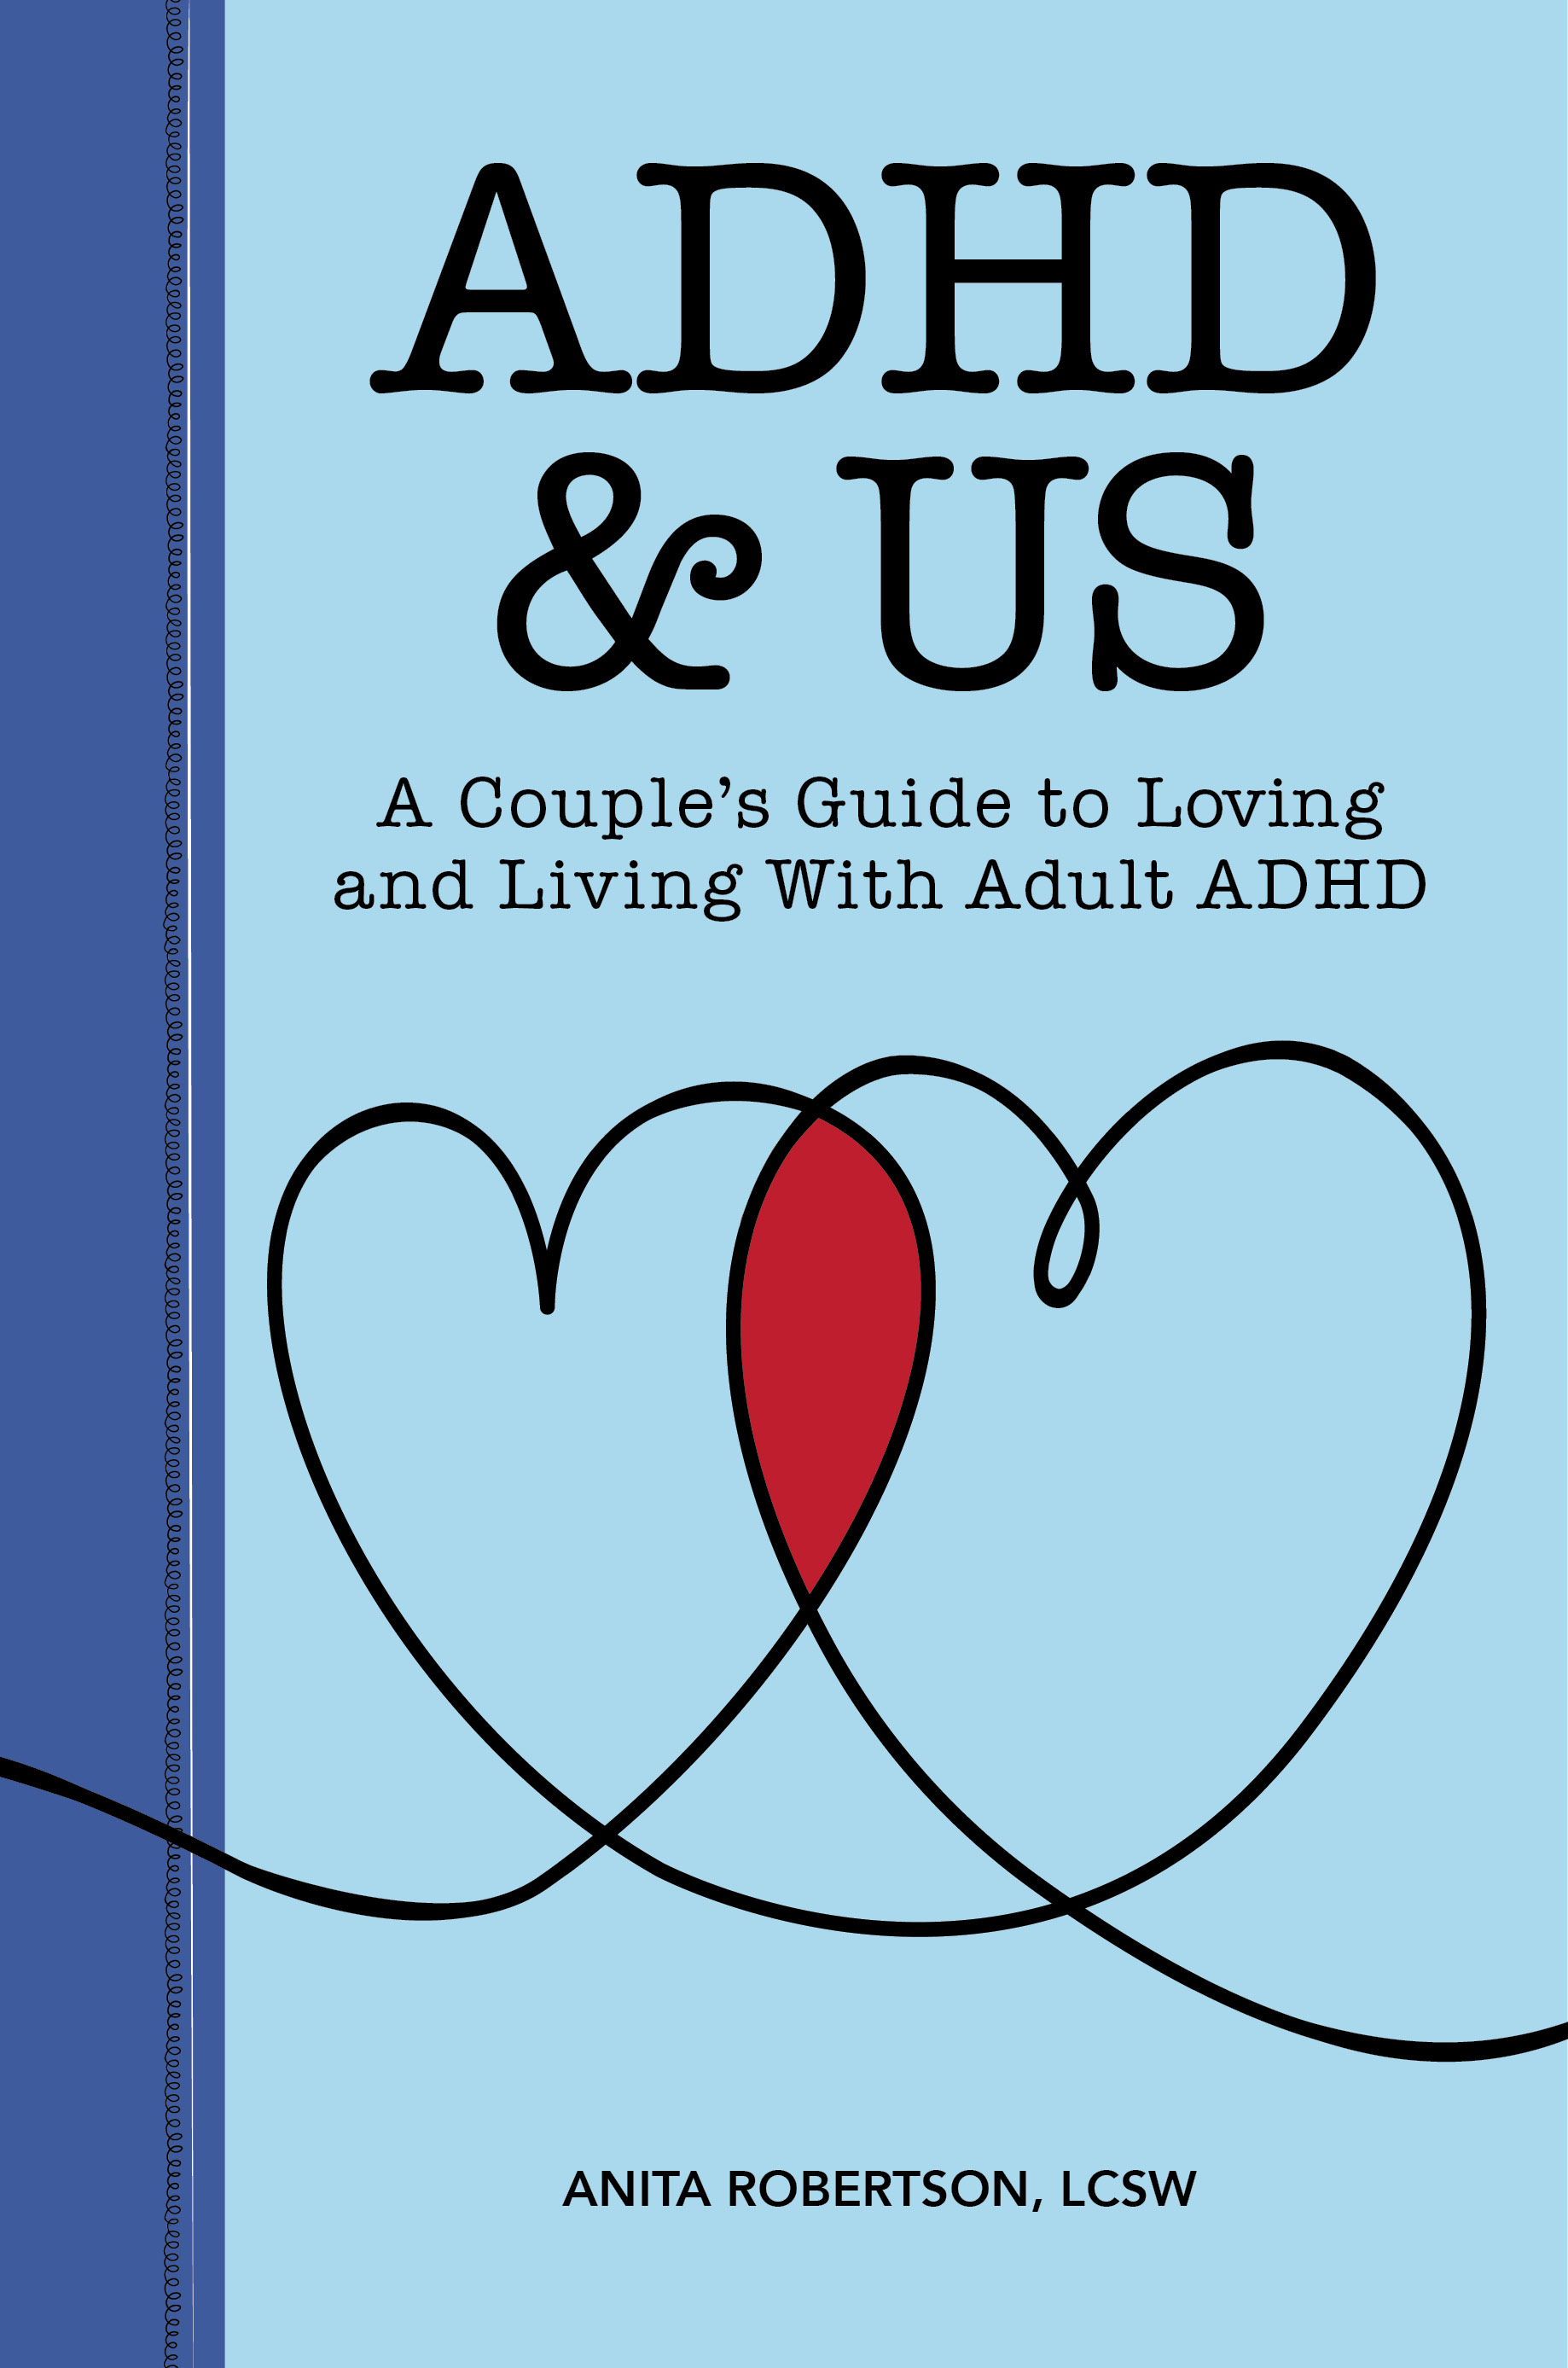 ADHD and US relationships